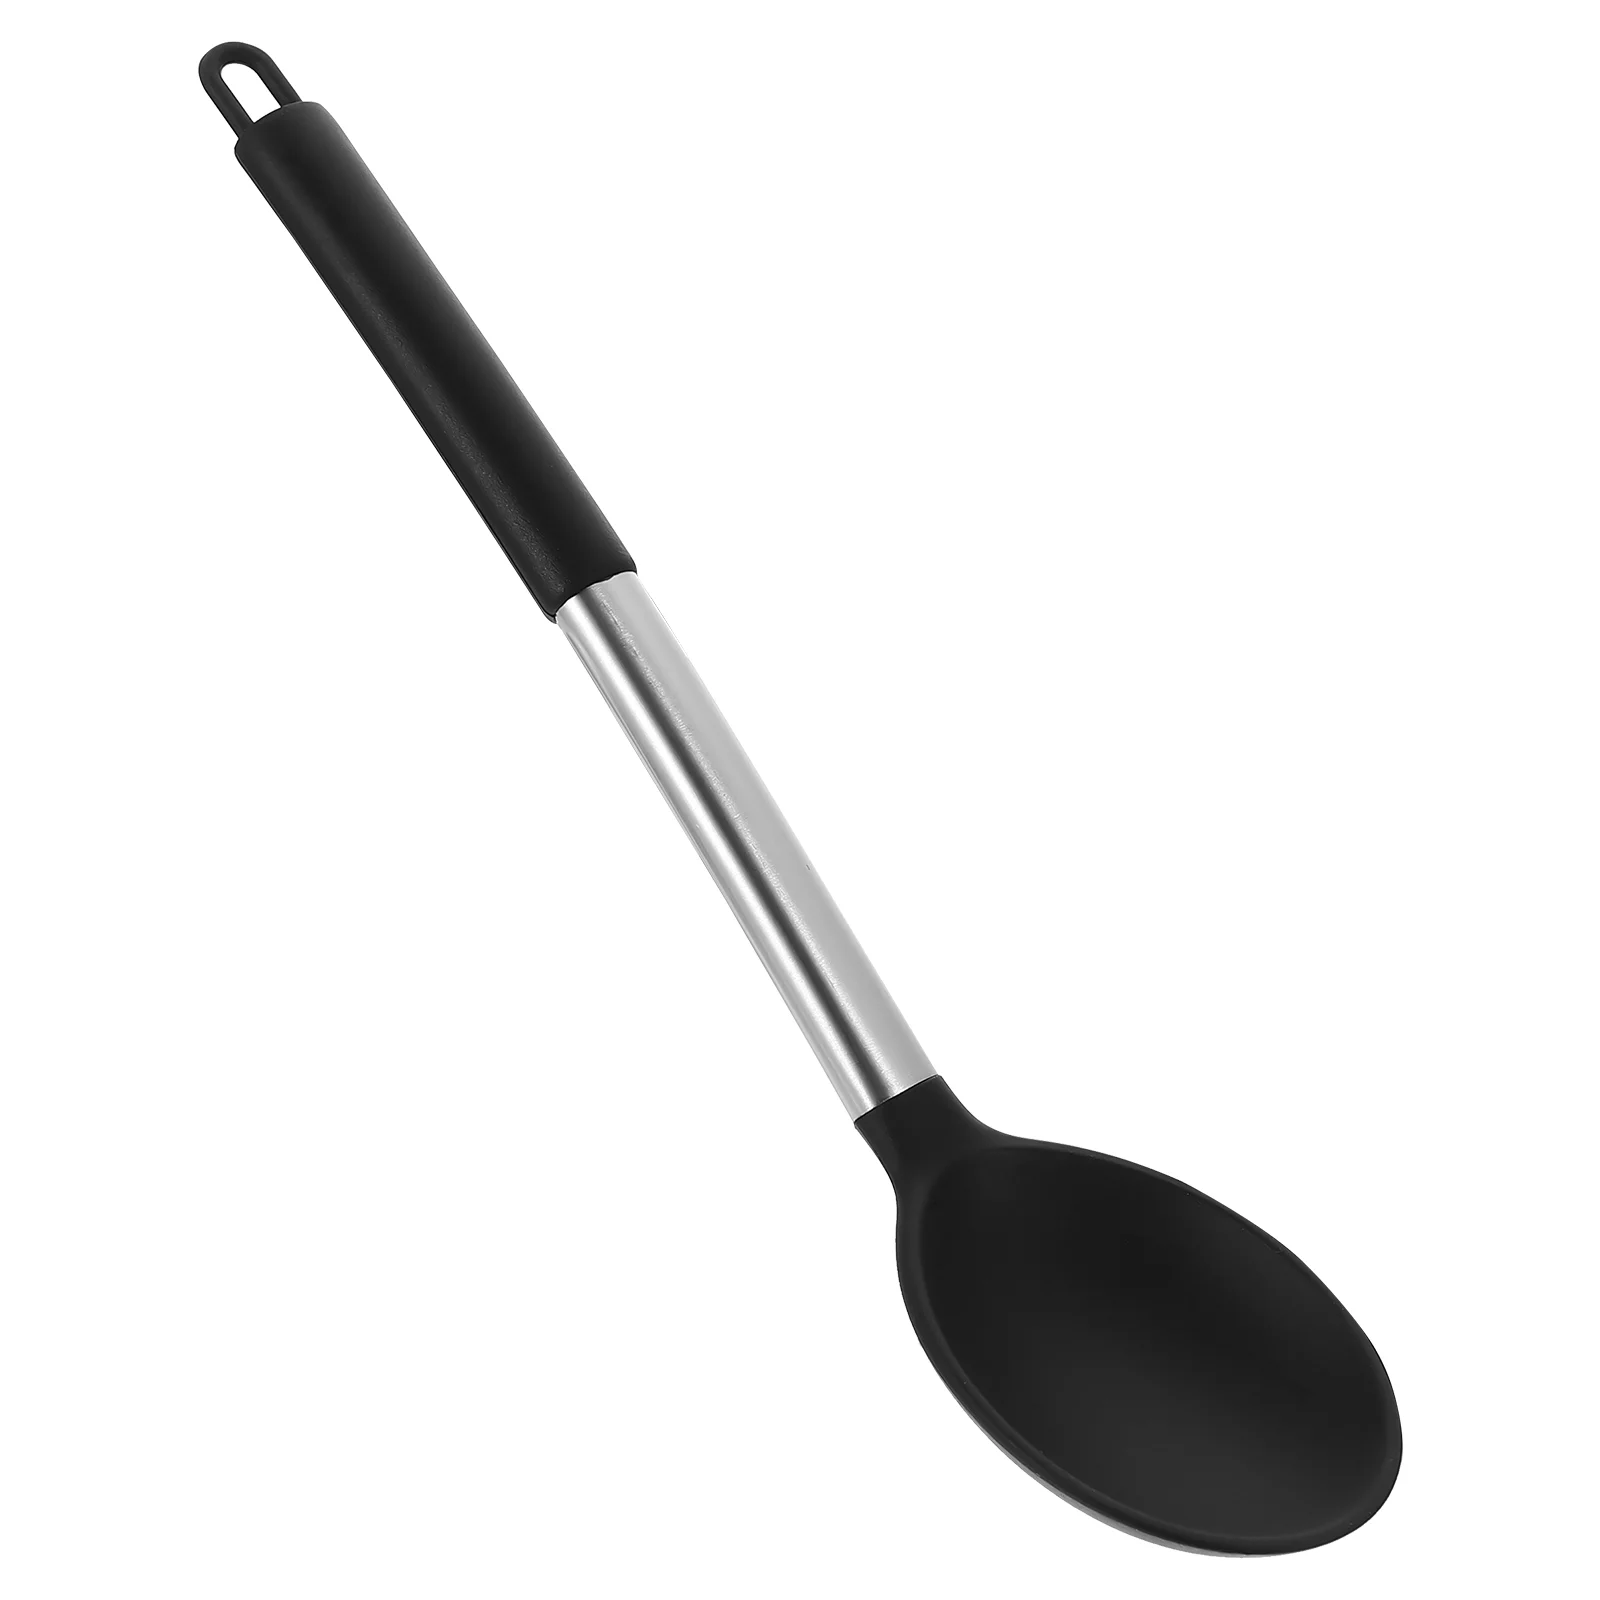 

Spoons Silicone Cooking Kitchen Nonstick Utensil Cookware Spoon Stirring Mixing Serving Utensils Spatulas Silicon Turner Baking